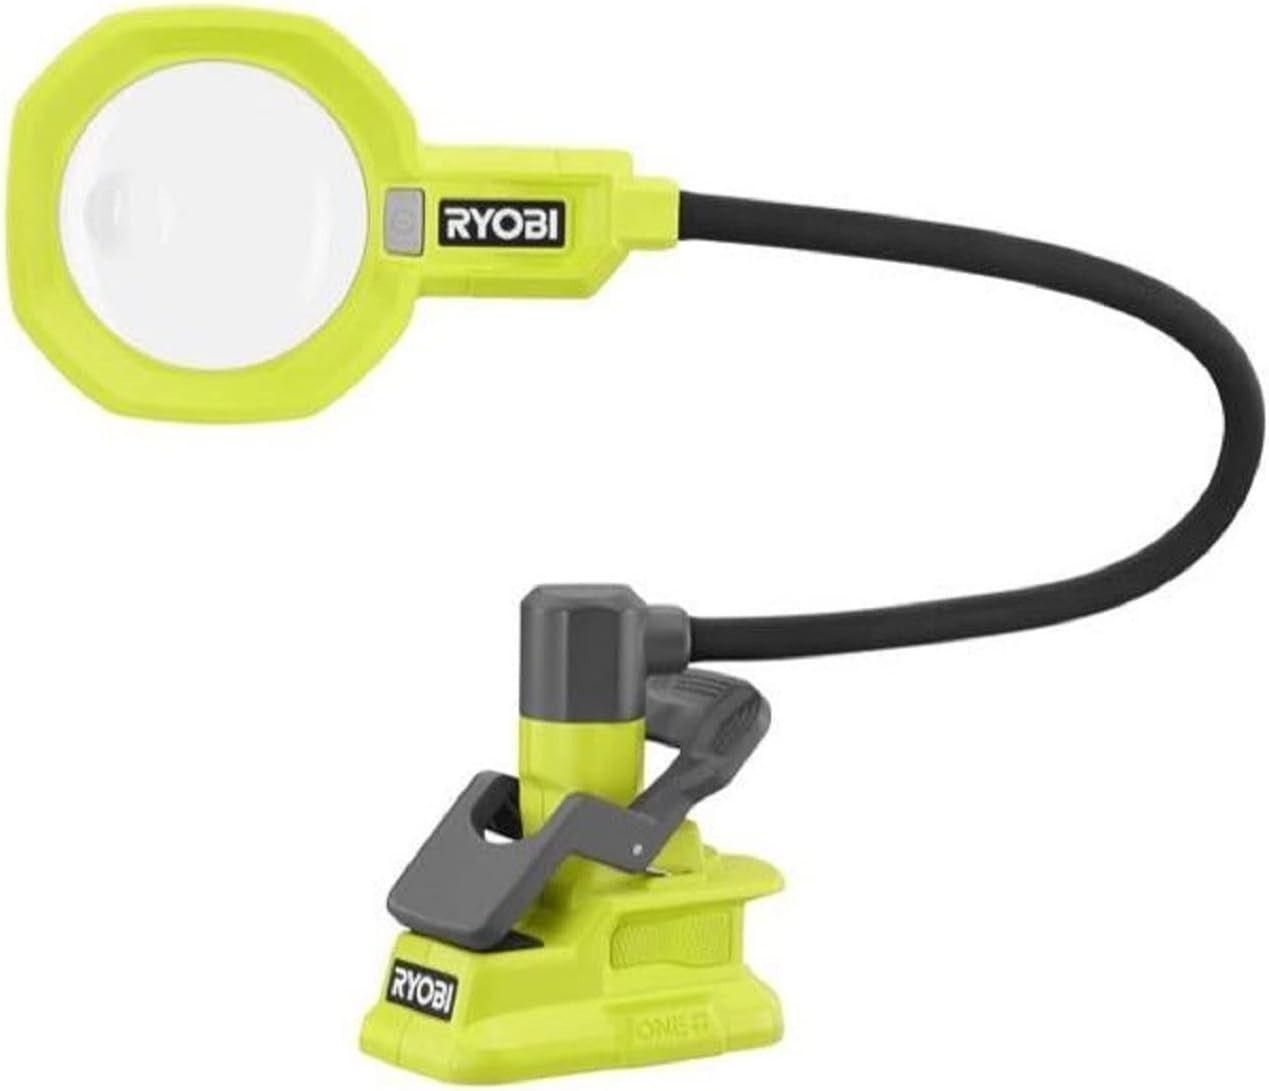 RYOBI  ONE+ PCL664 18V Cordless LED Magnifying Clamp Light Kit with Battery and Charger - Black/Green - Excellent